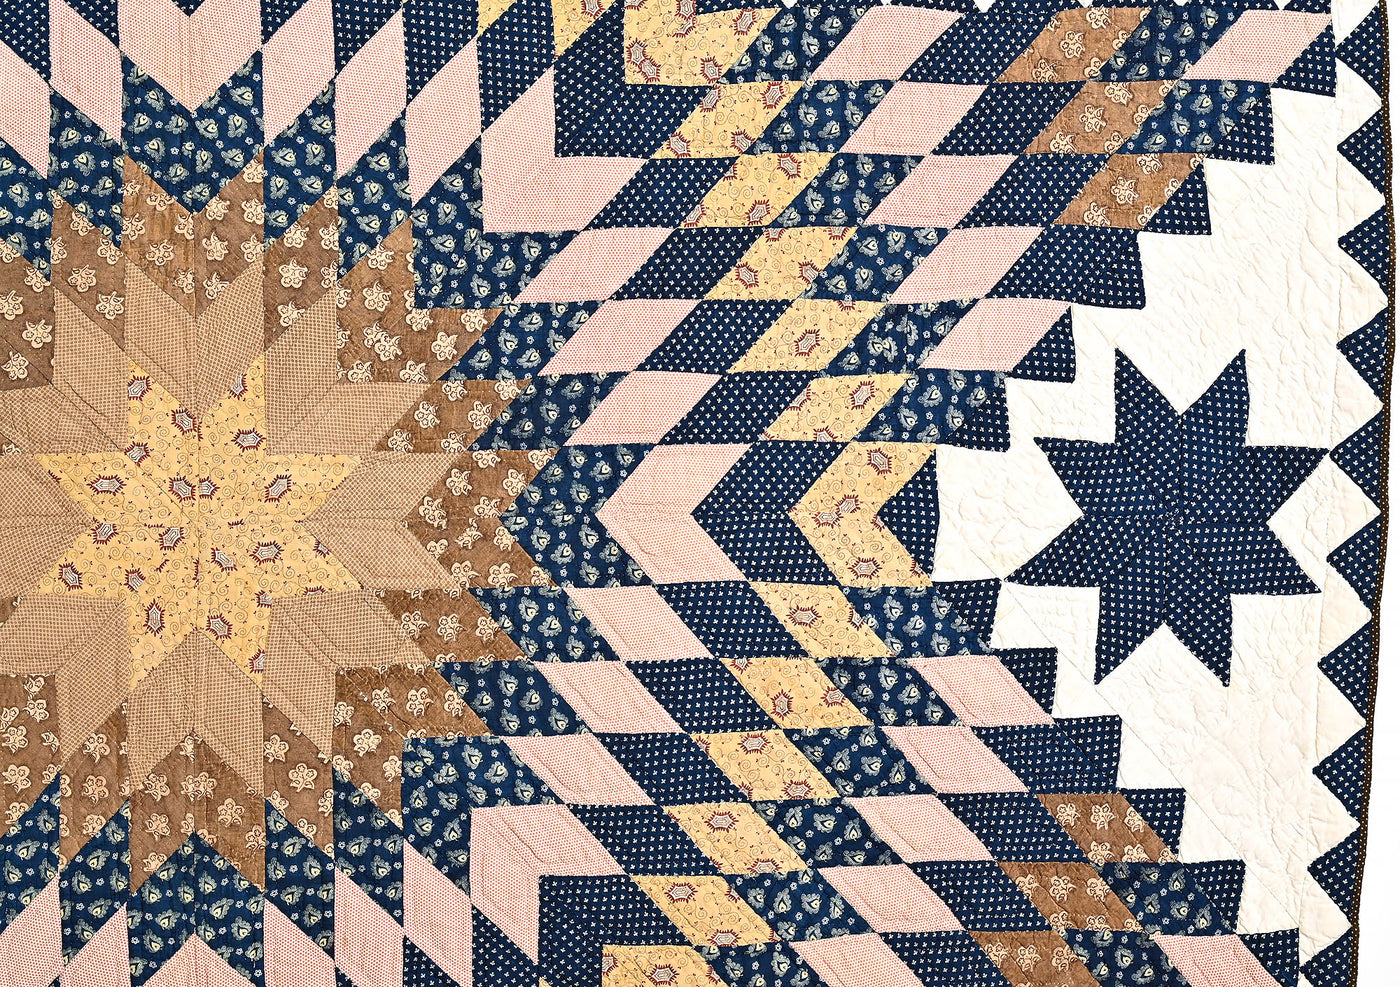 Feathered Lone Star Quilt